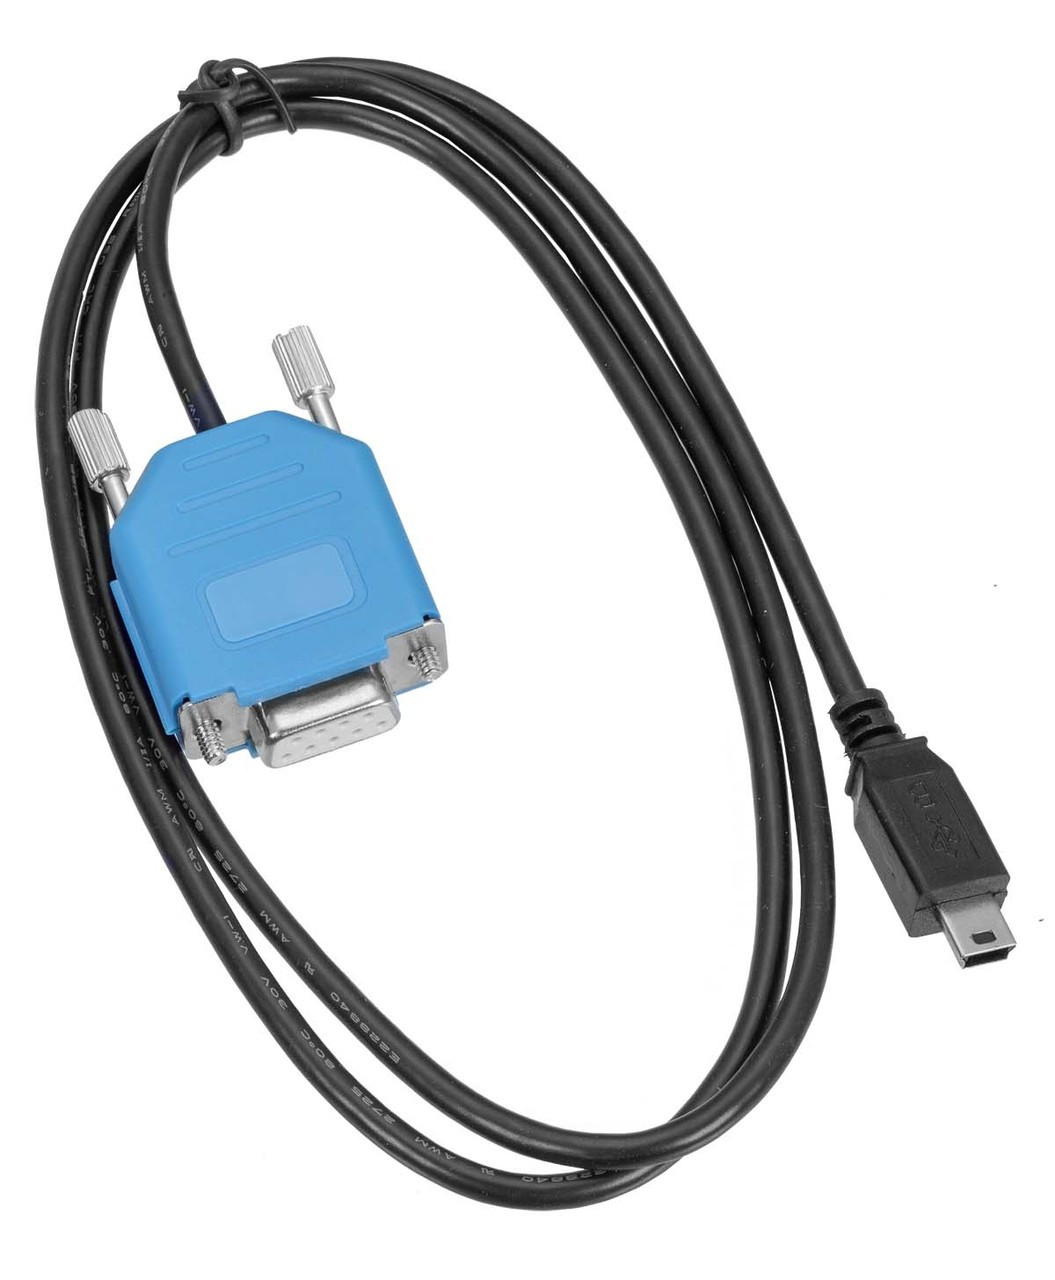 USB Cable for 500 Data Download Software - CMI Inc.